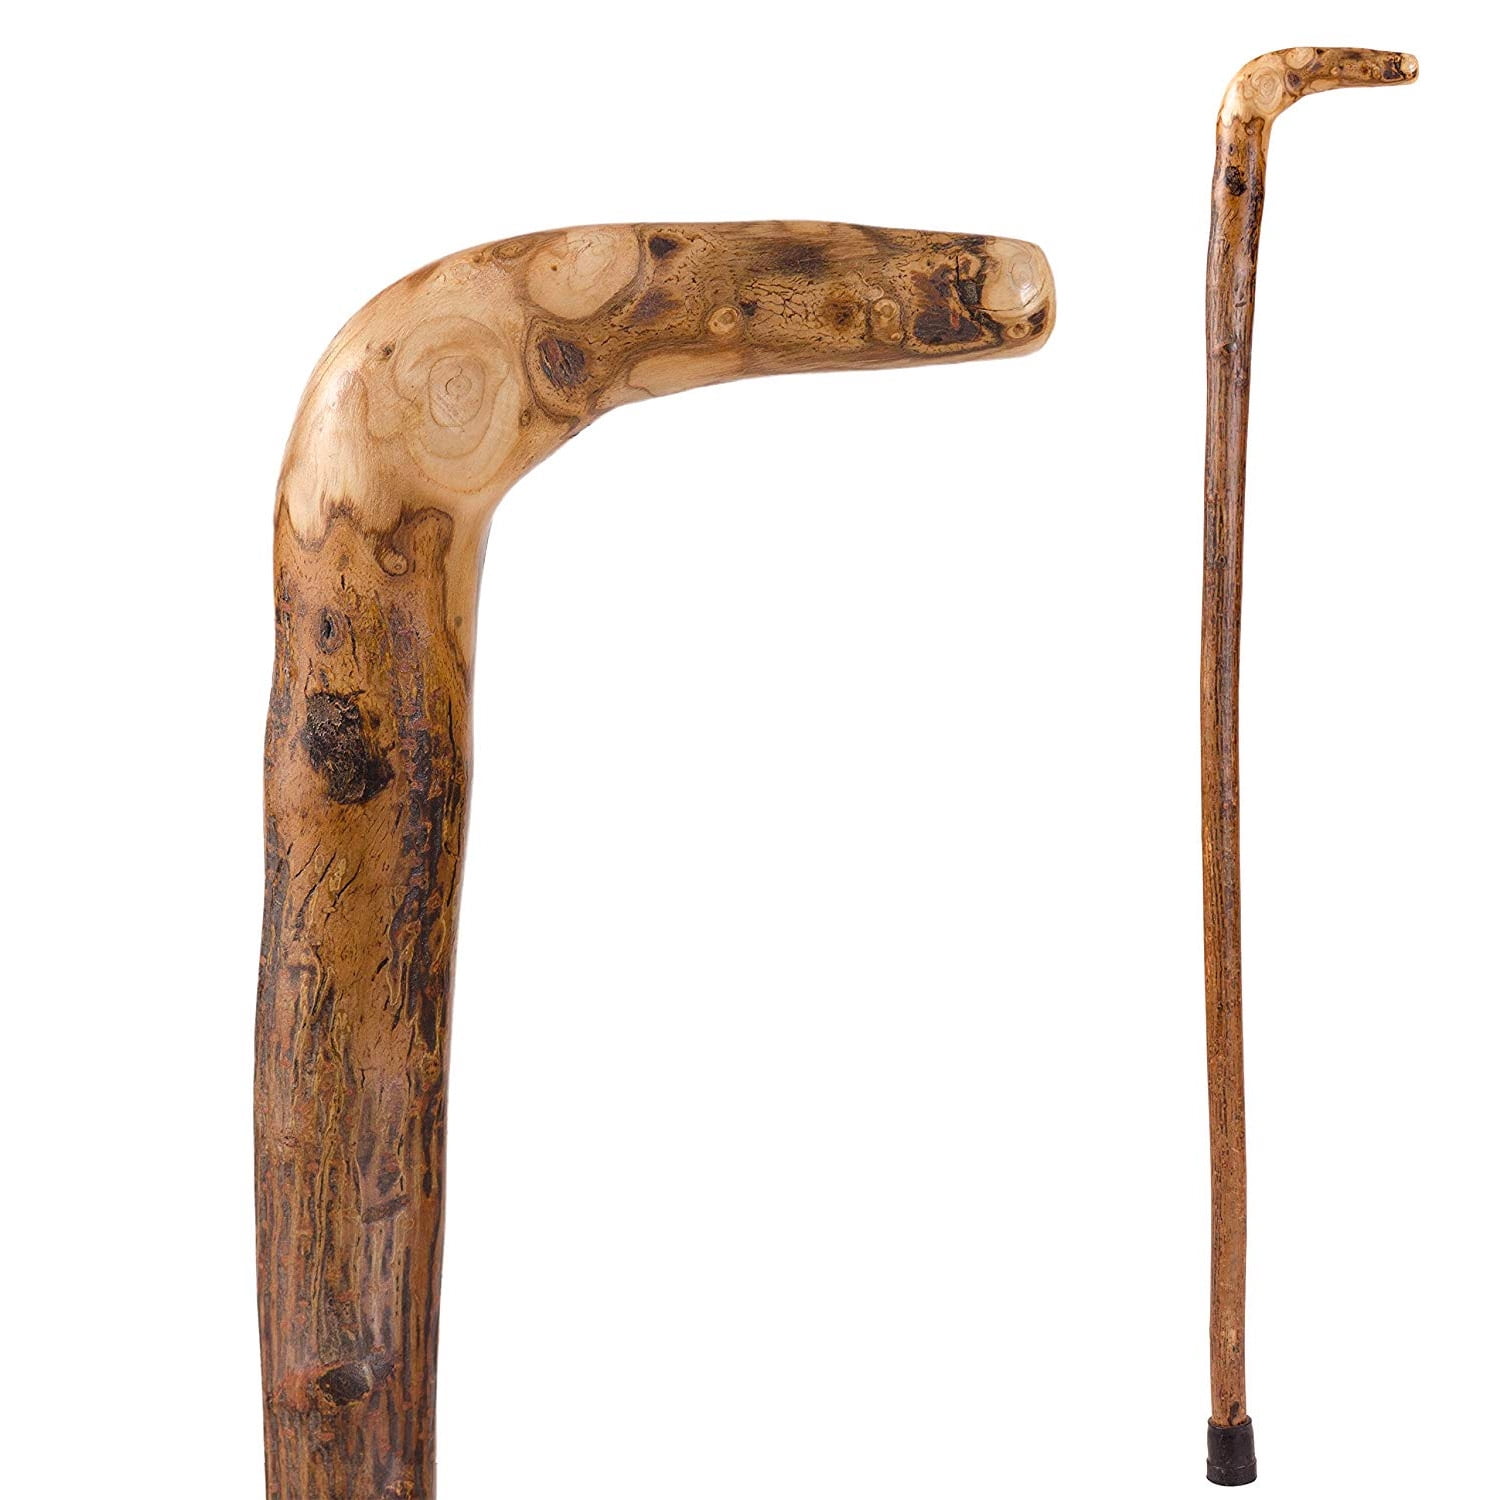 Brazos Free Form Natural Hardwood Root Handcrafted Walking Cane